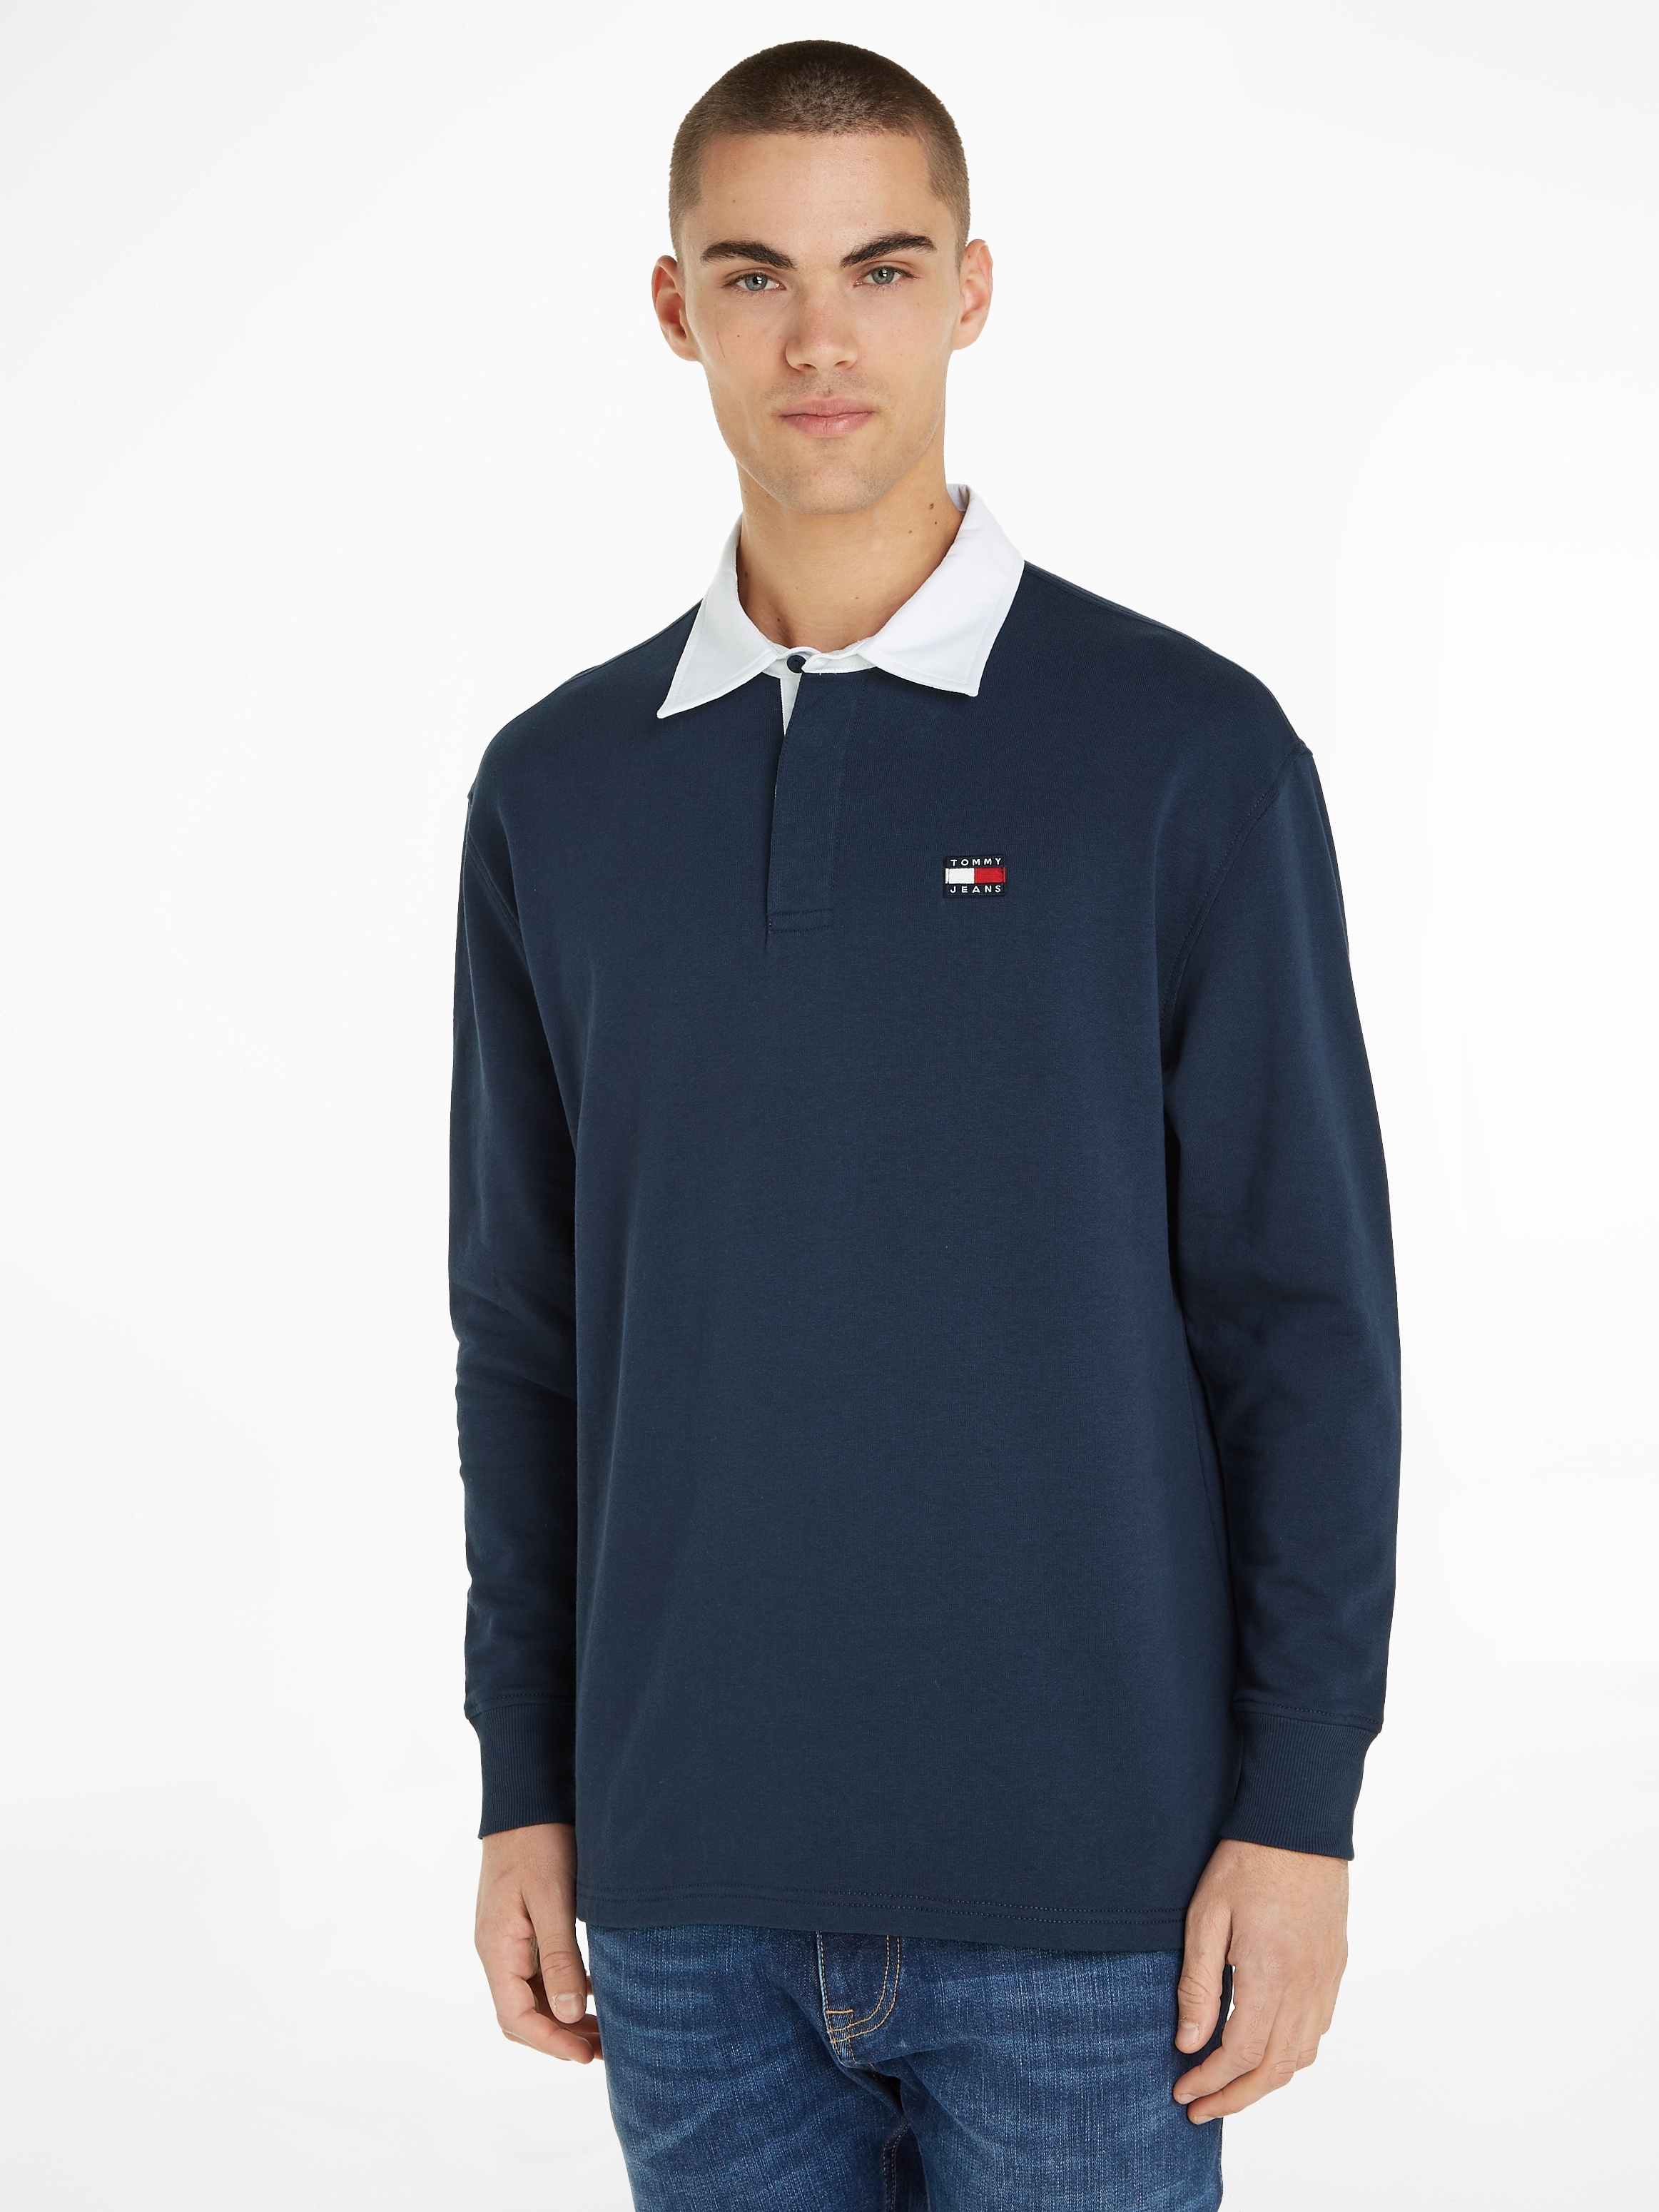 Tommy Jeans Langarm-Poloshirt »TJM BADGE RUGBY«